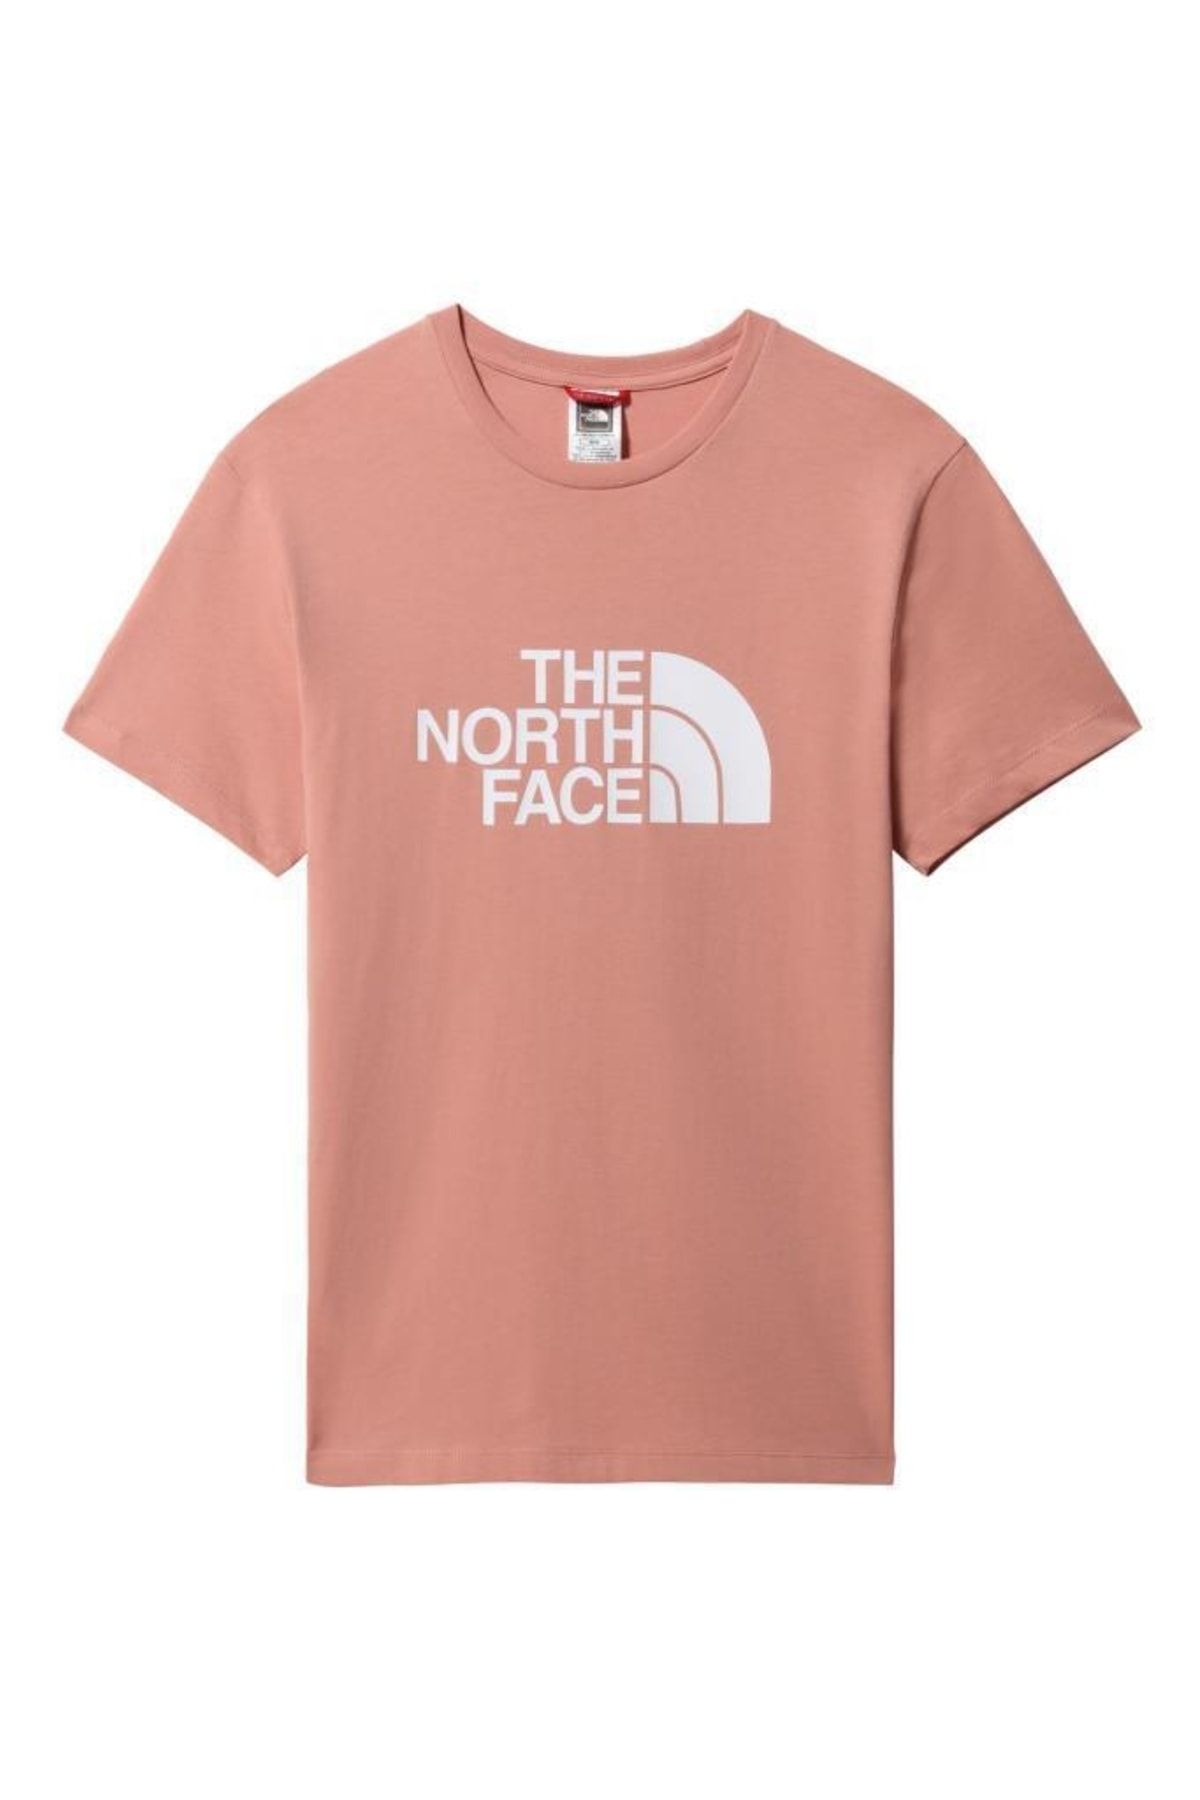 The North Face کاشی تی شرت زنانه آسان